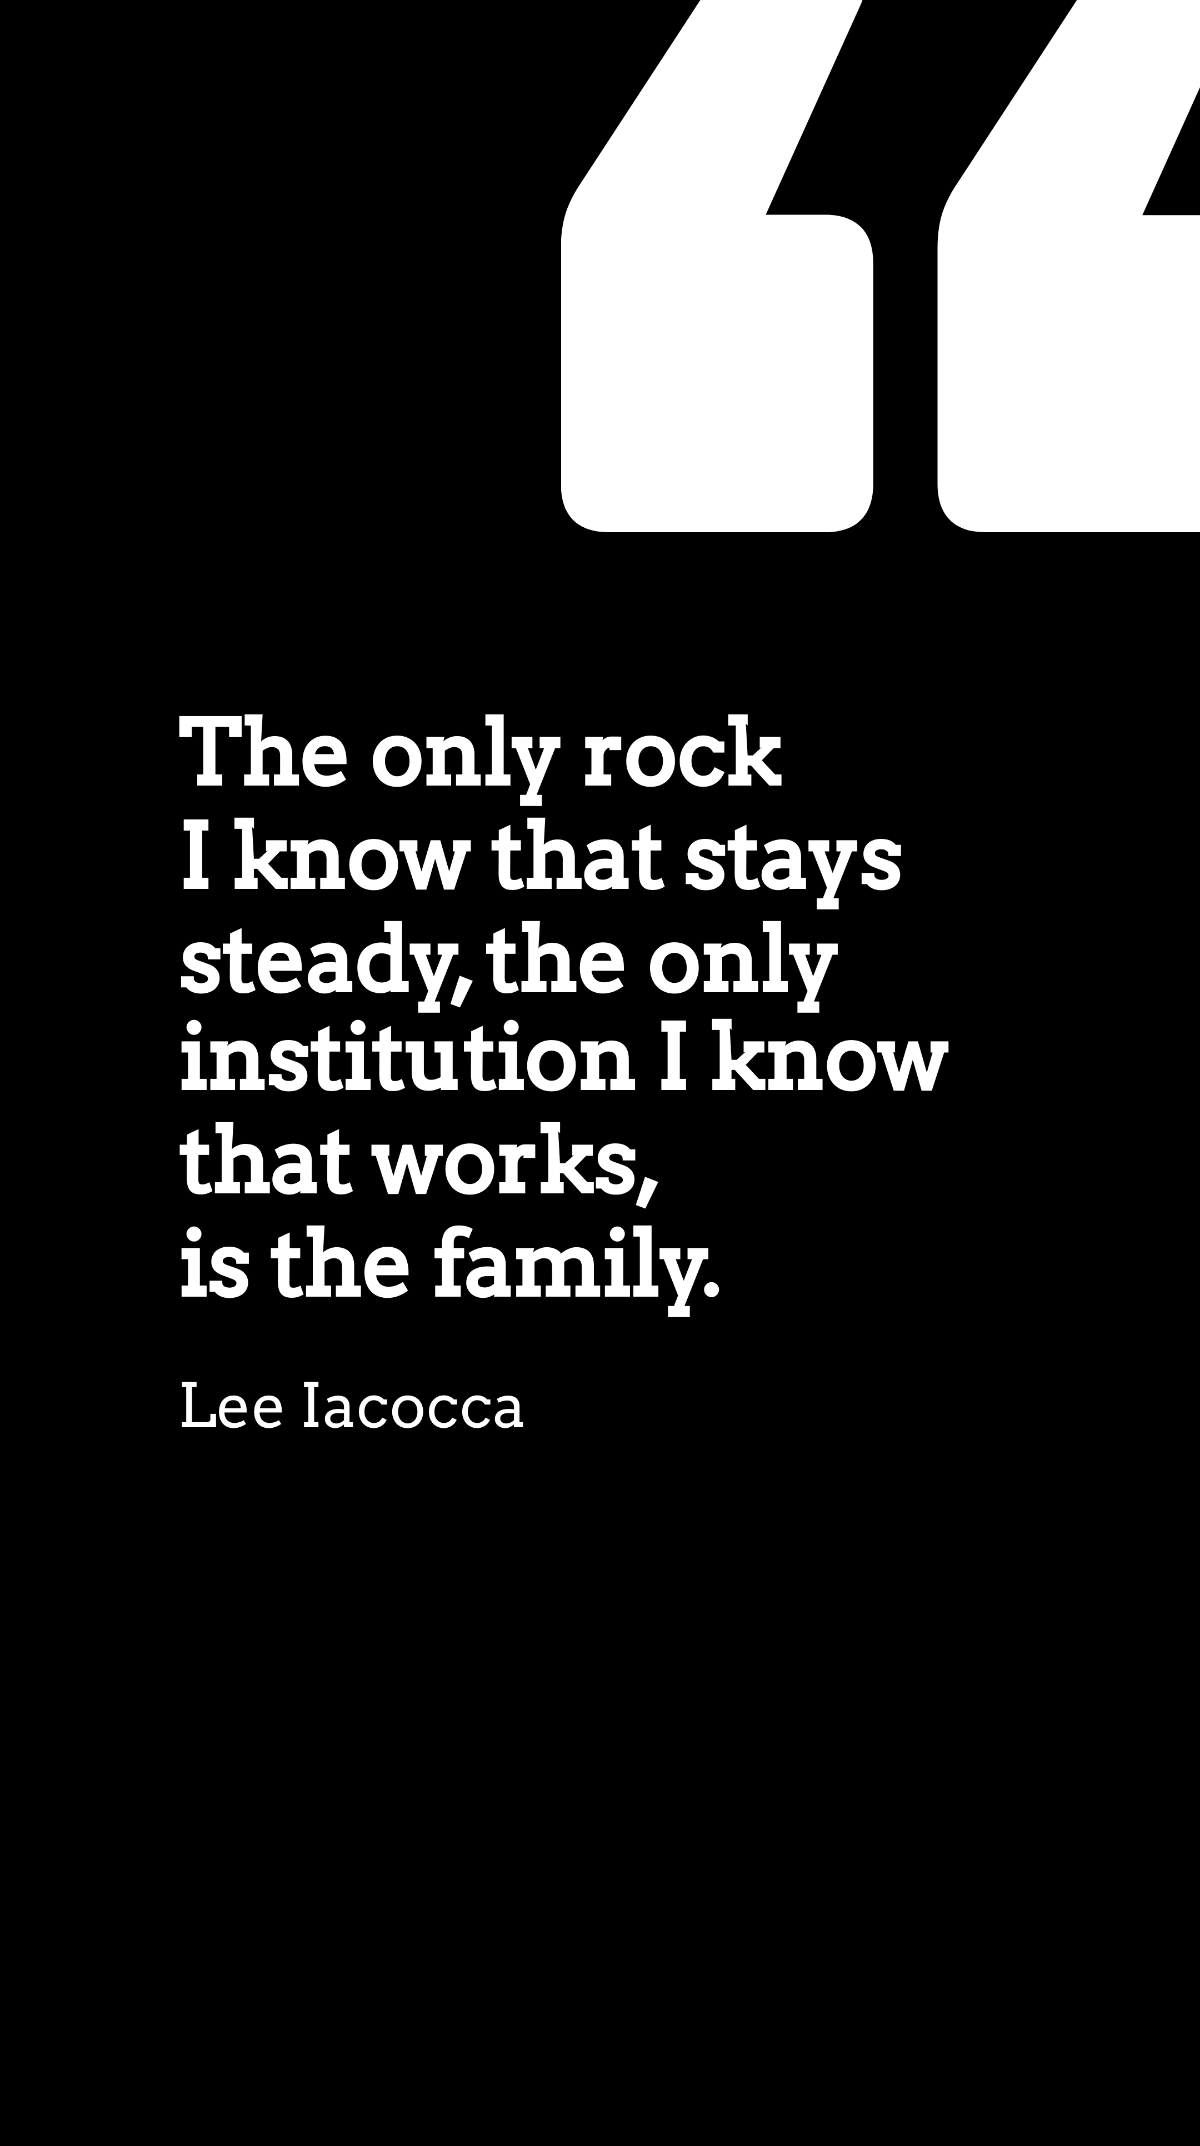 Lee Iacocca - The only rock I know that stays steady, the only institution I know that works, is the family.